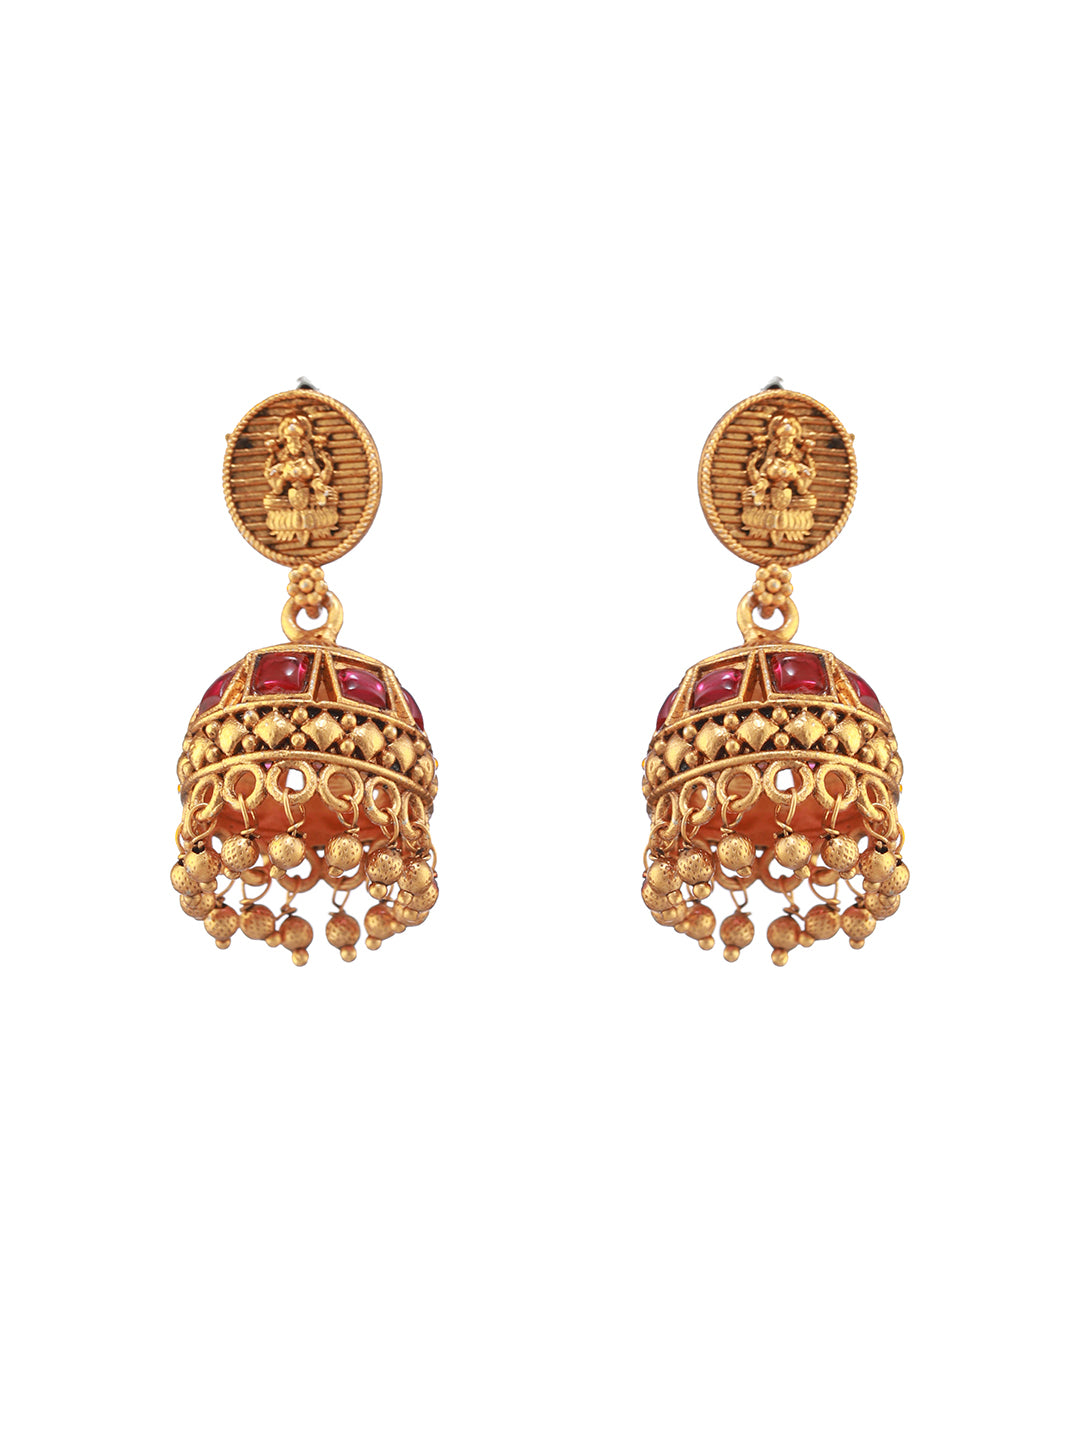 Red Goddess Laxmi Coin Block Gold-Plated Jewellery Set